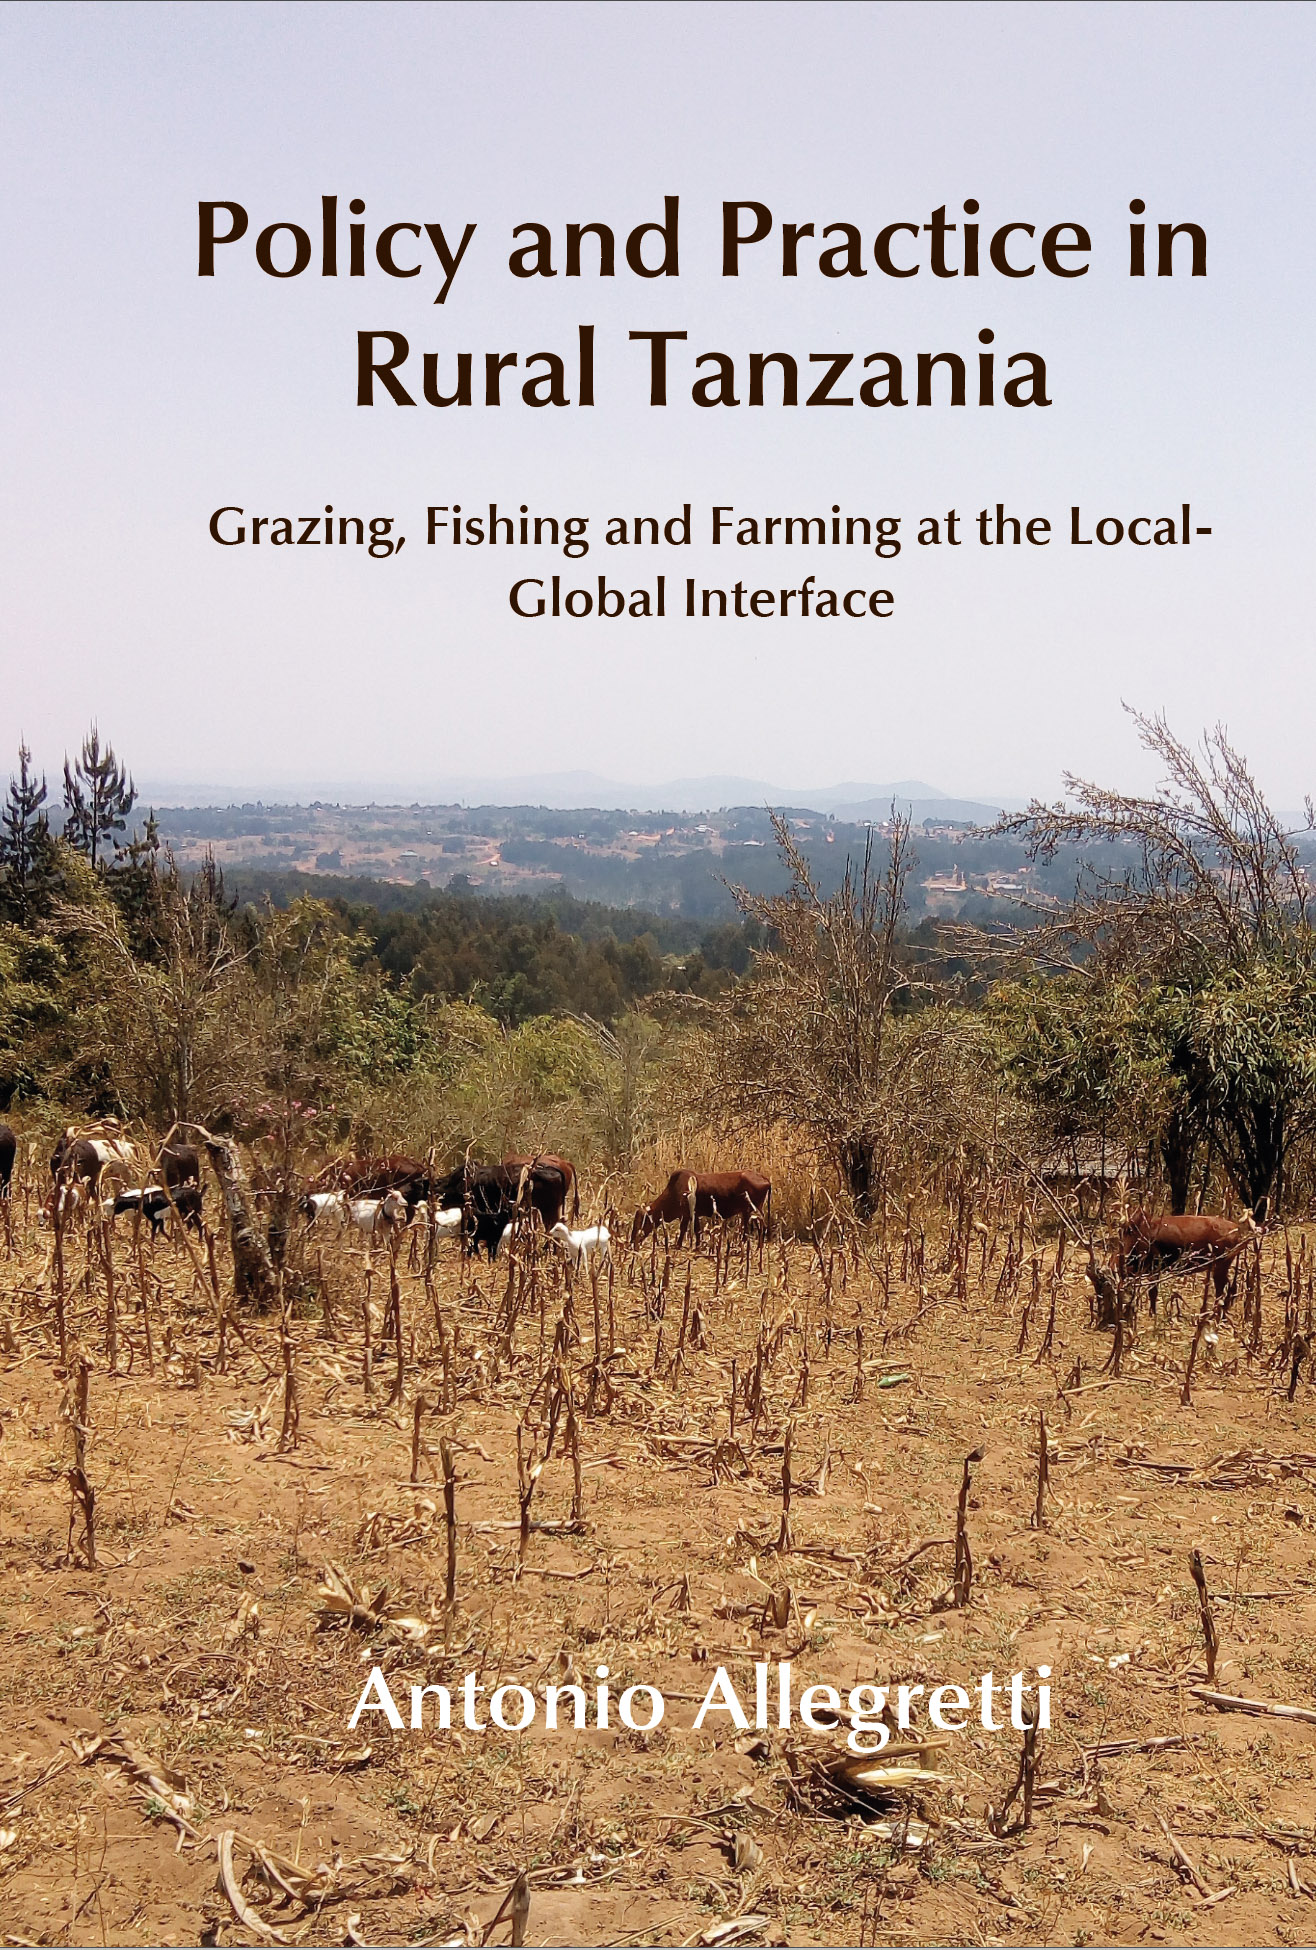 Policy and Practice in Rural Tanzania: Grazing, Fishing and Farming at the Local–Global Interface (The White Horse Press, 2022)